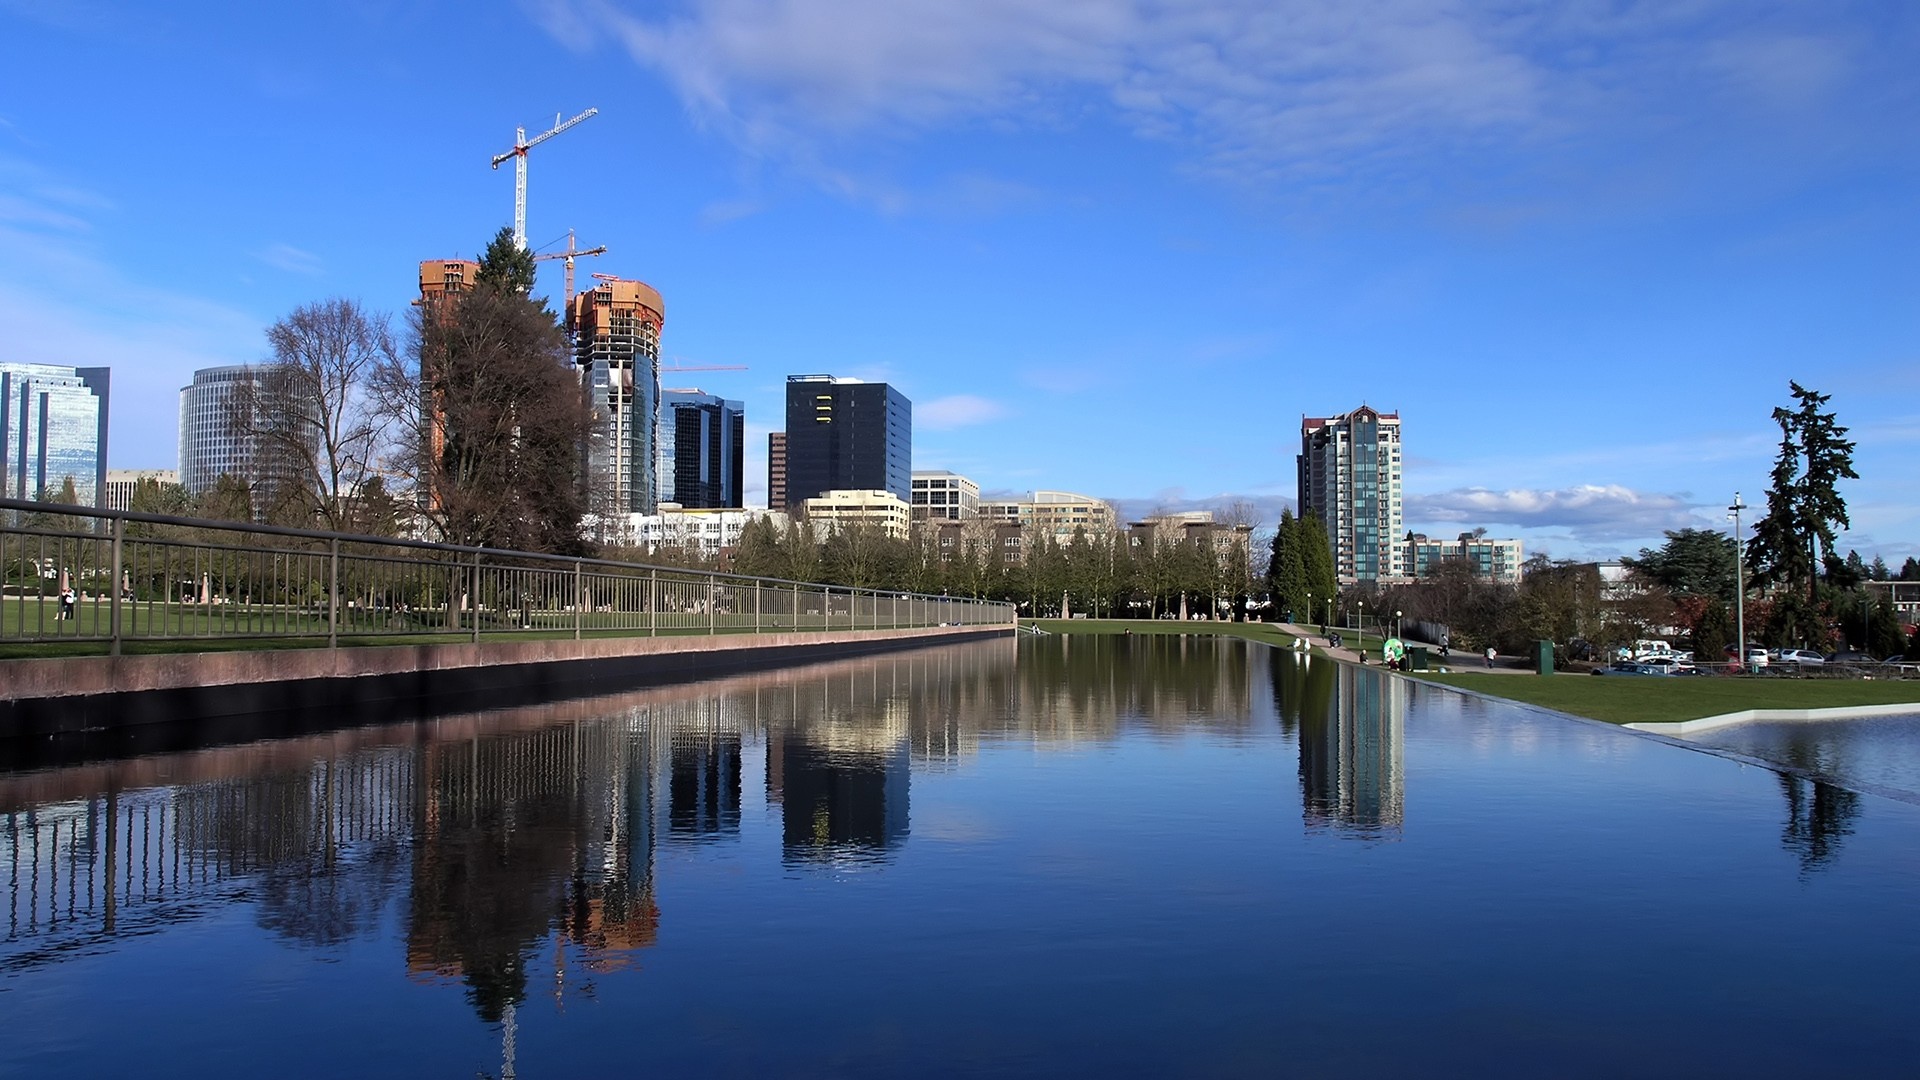 General 1920x1080 cityscape city park canal water reflection